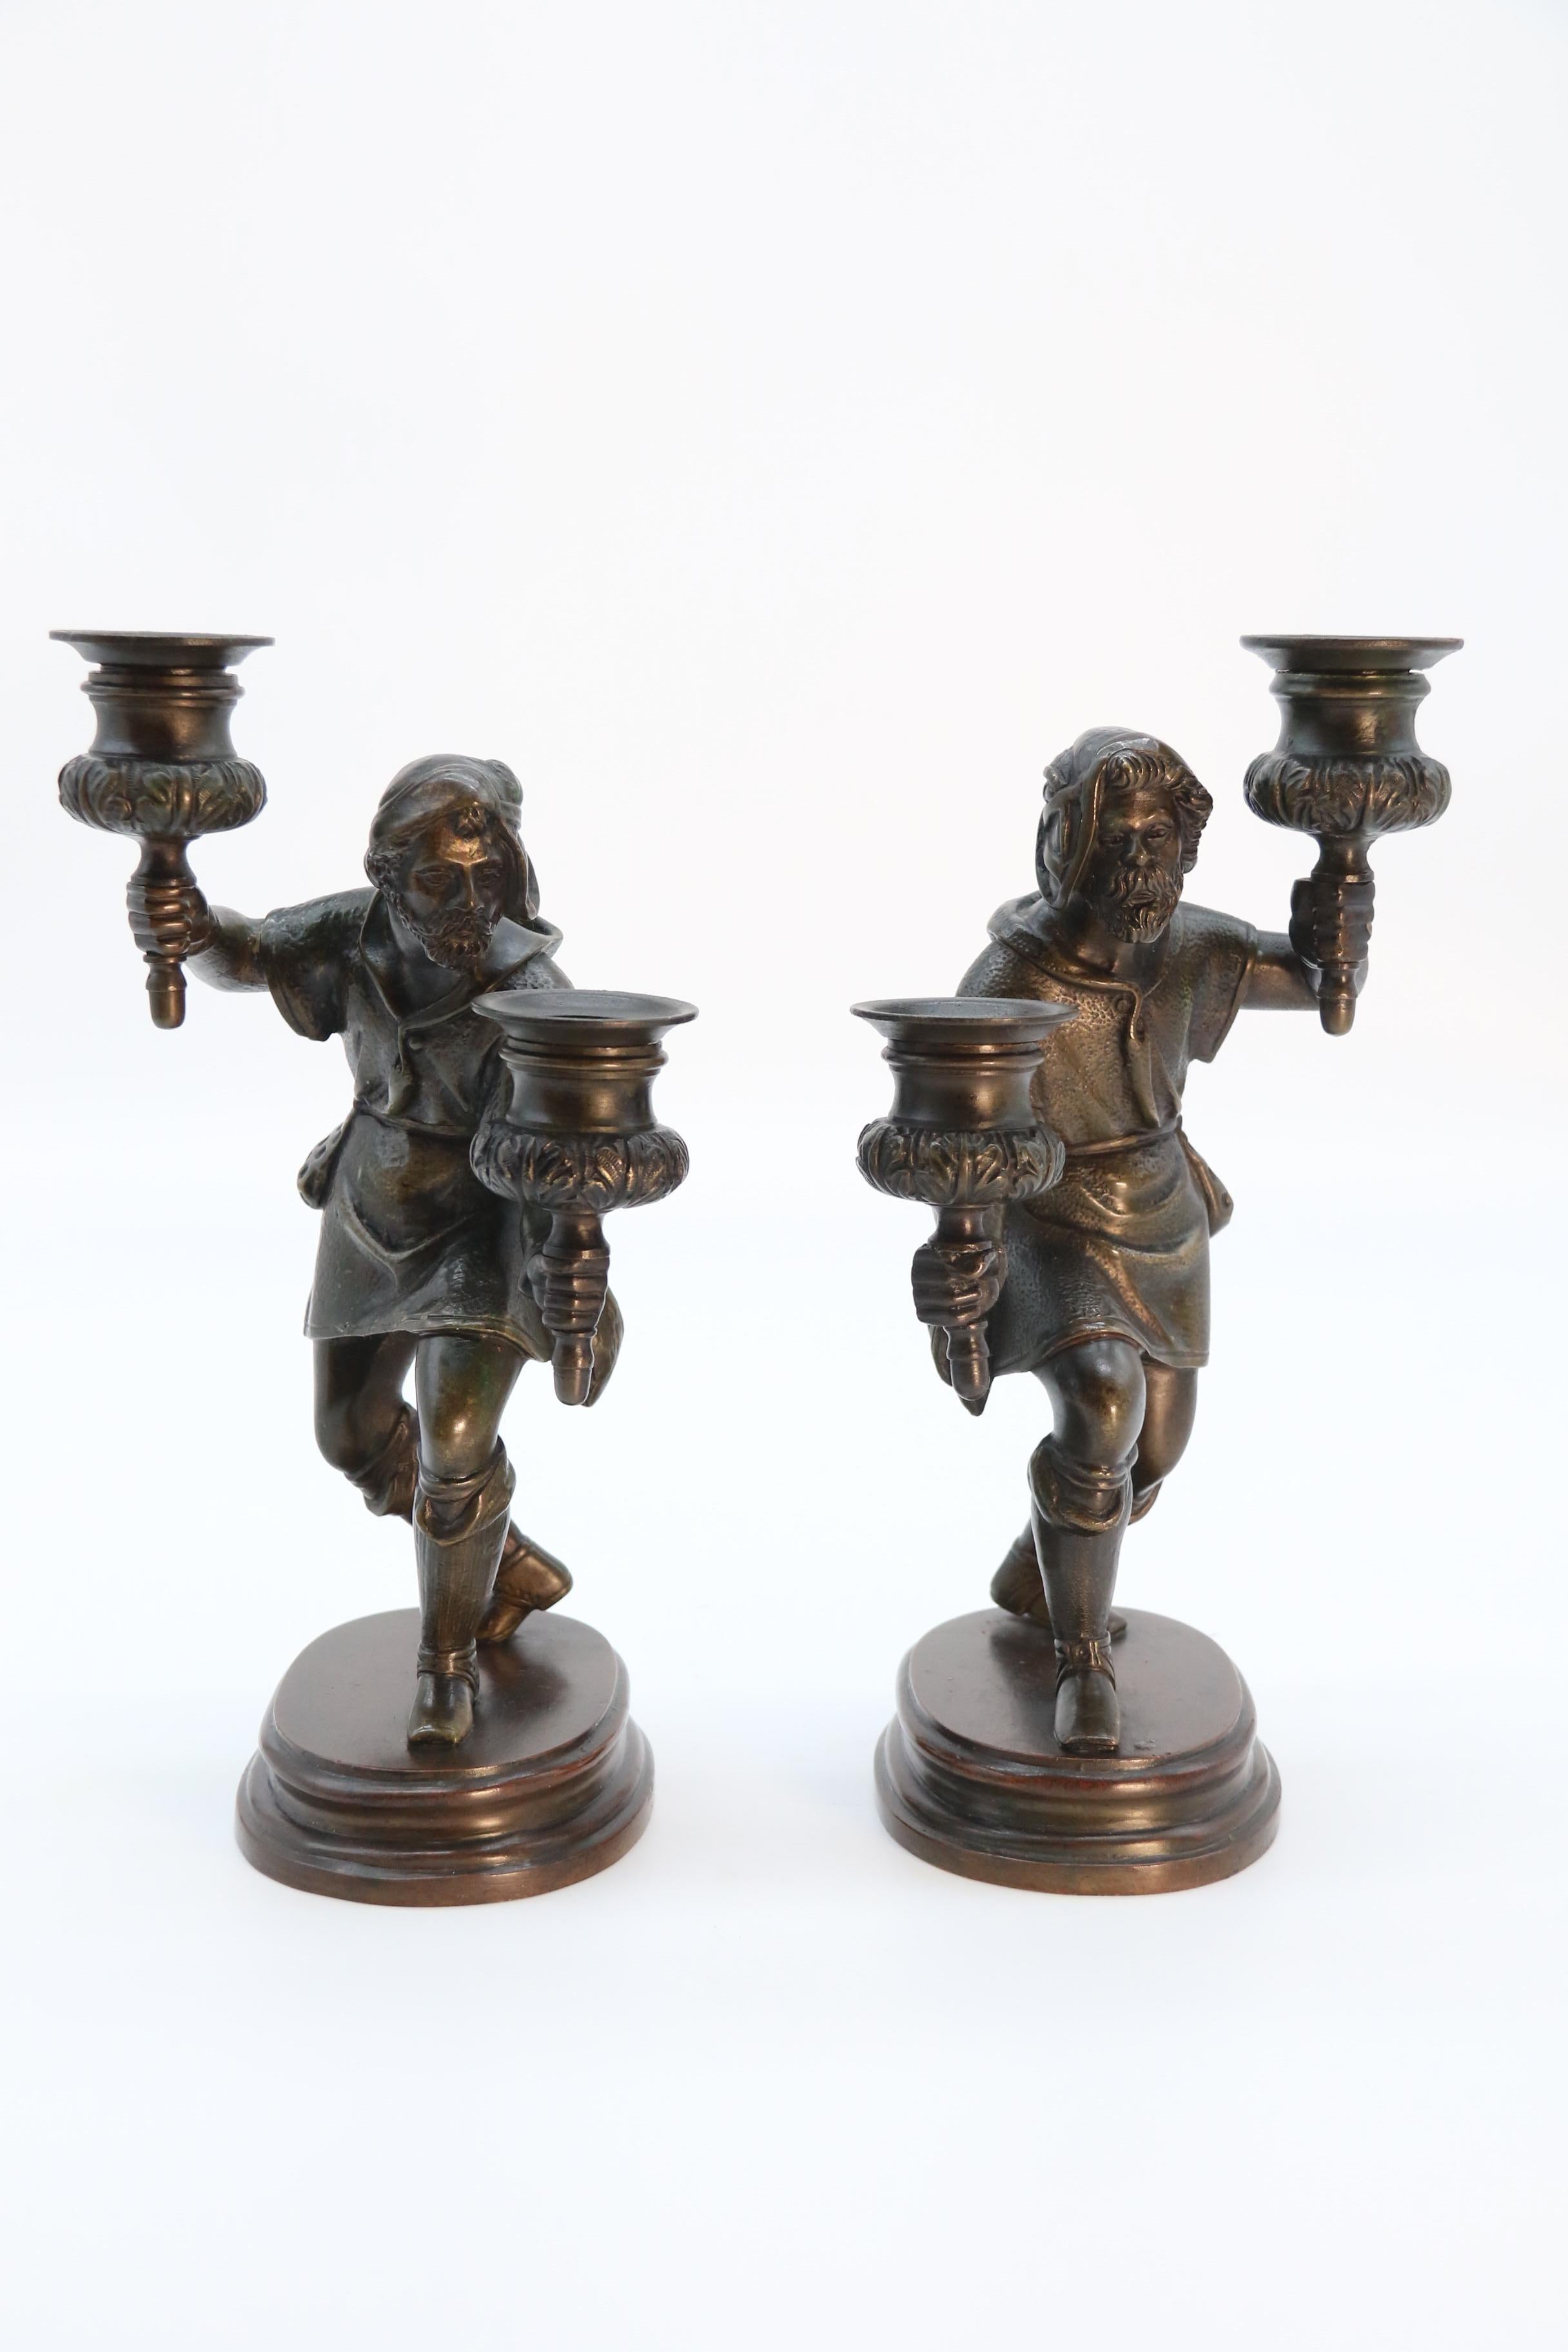 
This highly decorative pair of mid 19th century bronze double candlesticks are beautifully cast in solid bronze. They have very good detail and are each in the form of a medieval watchman who is modelled wearing a simple hat, robe and leggings with